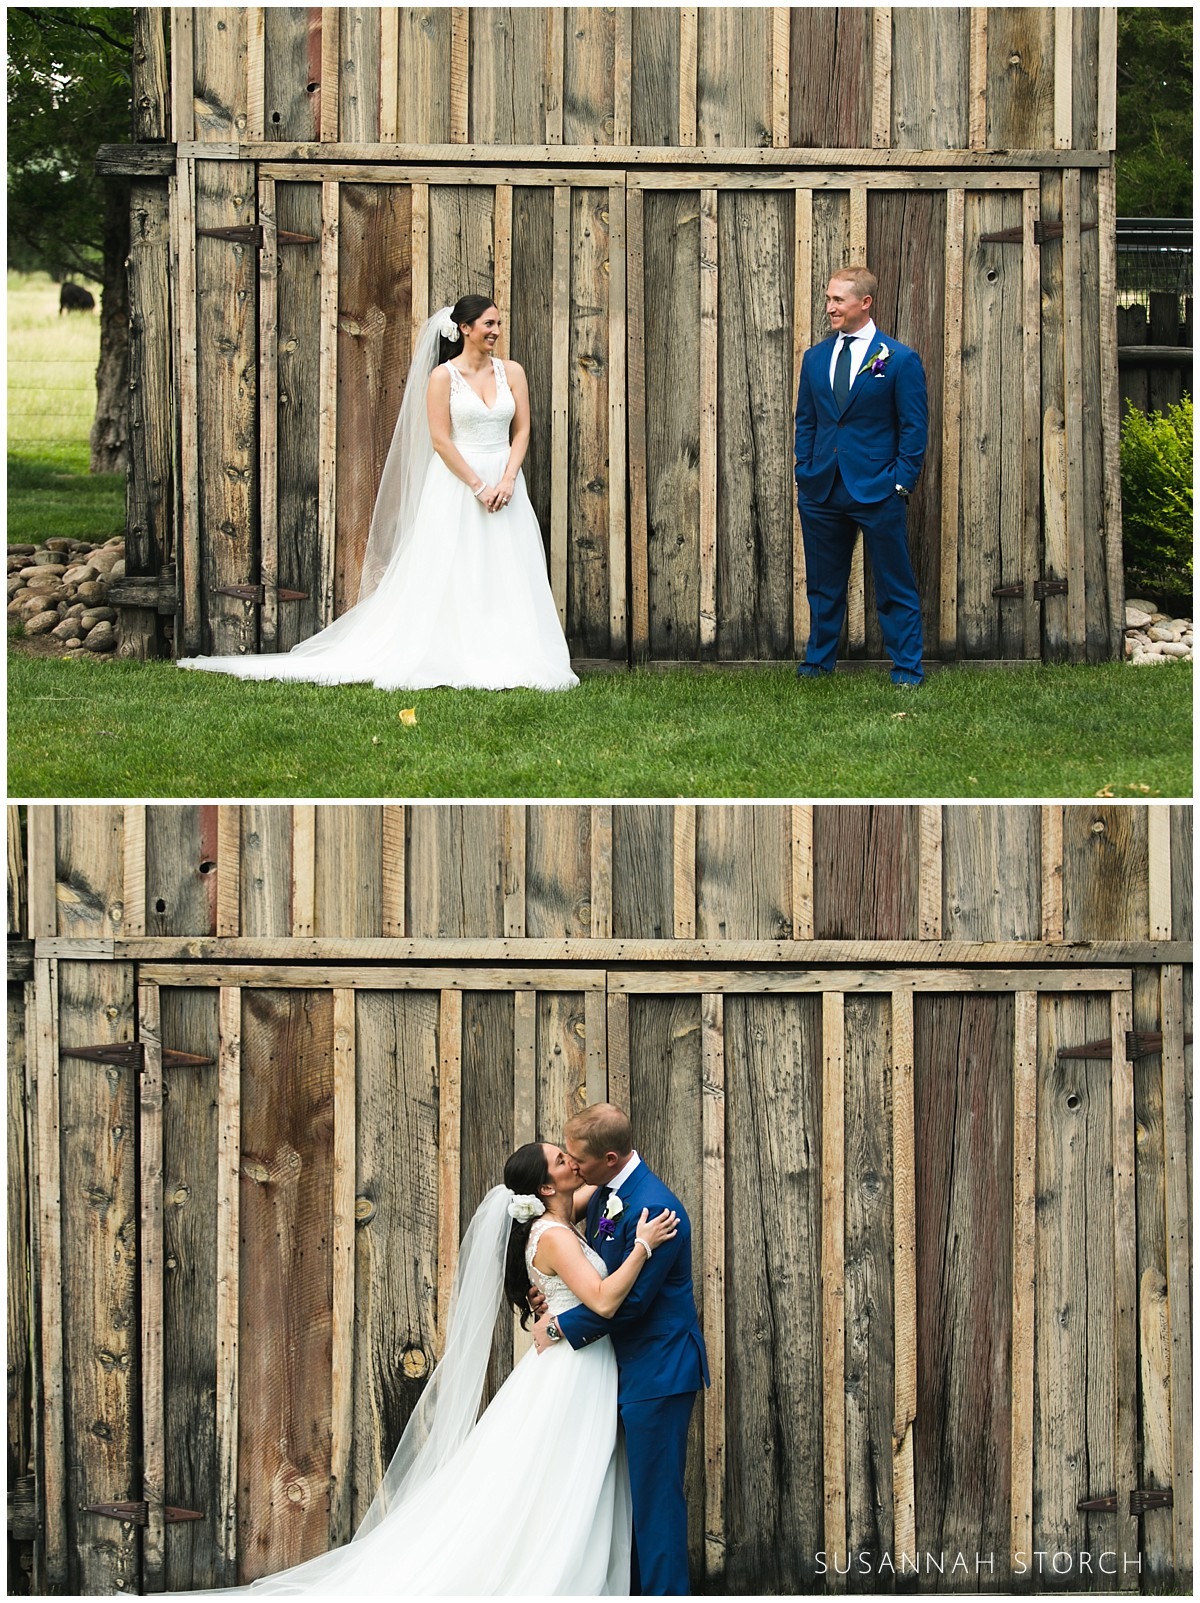 two images of a bride and groom standing in front of a wood barn